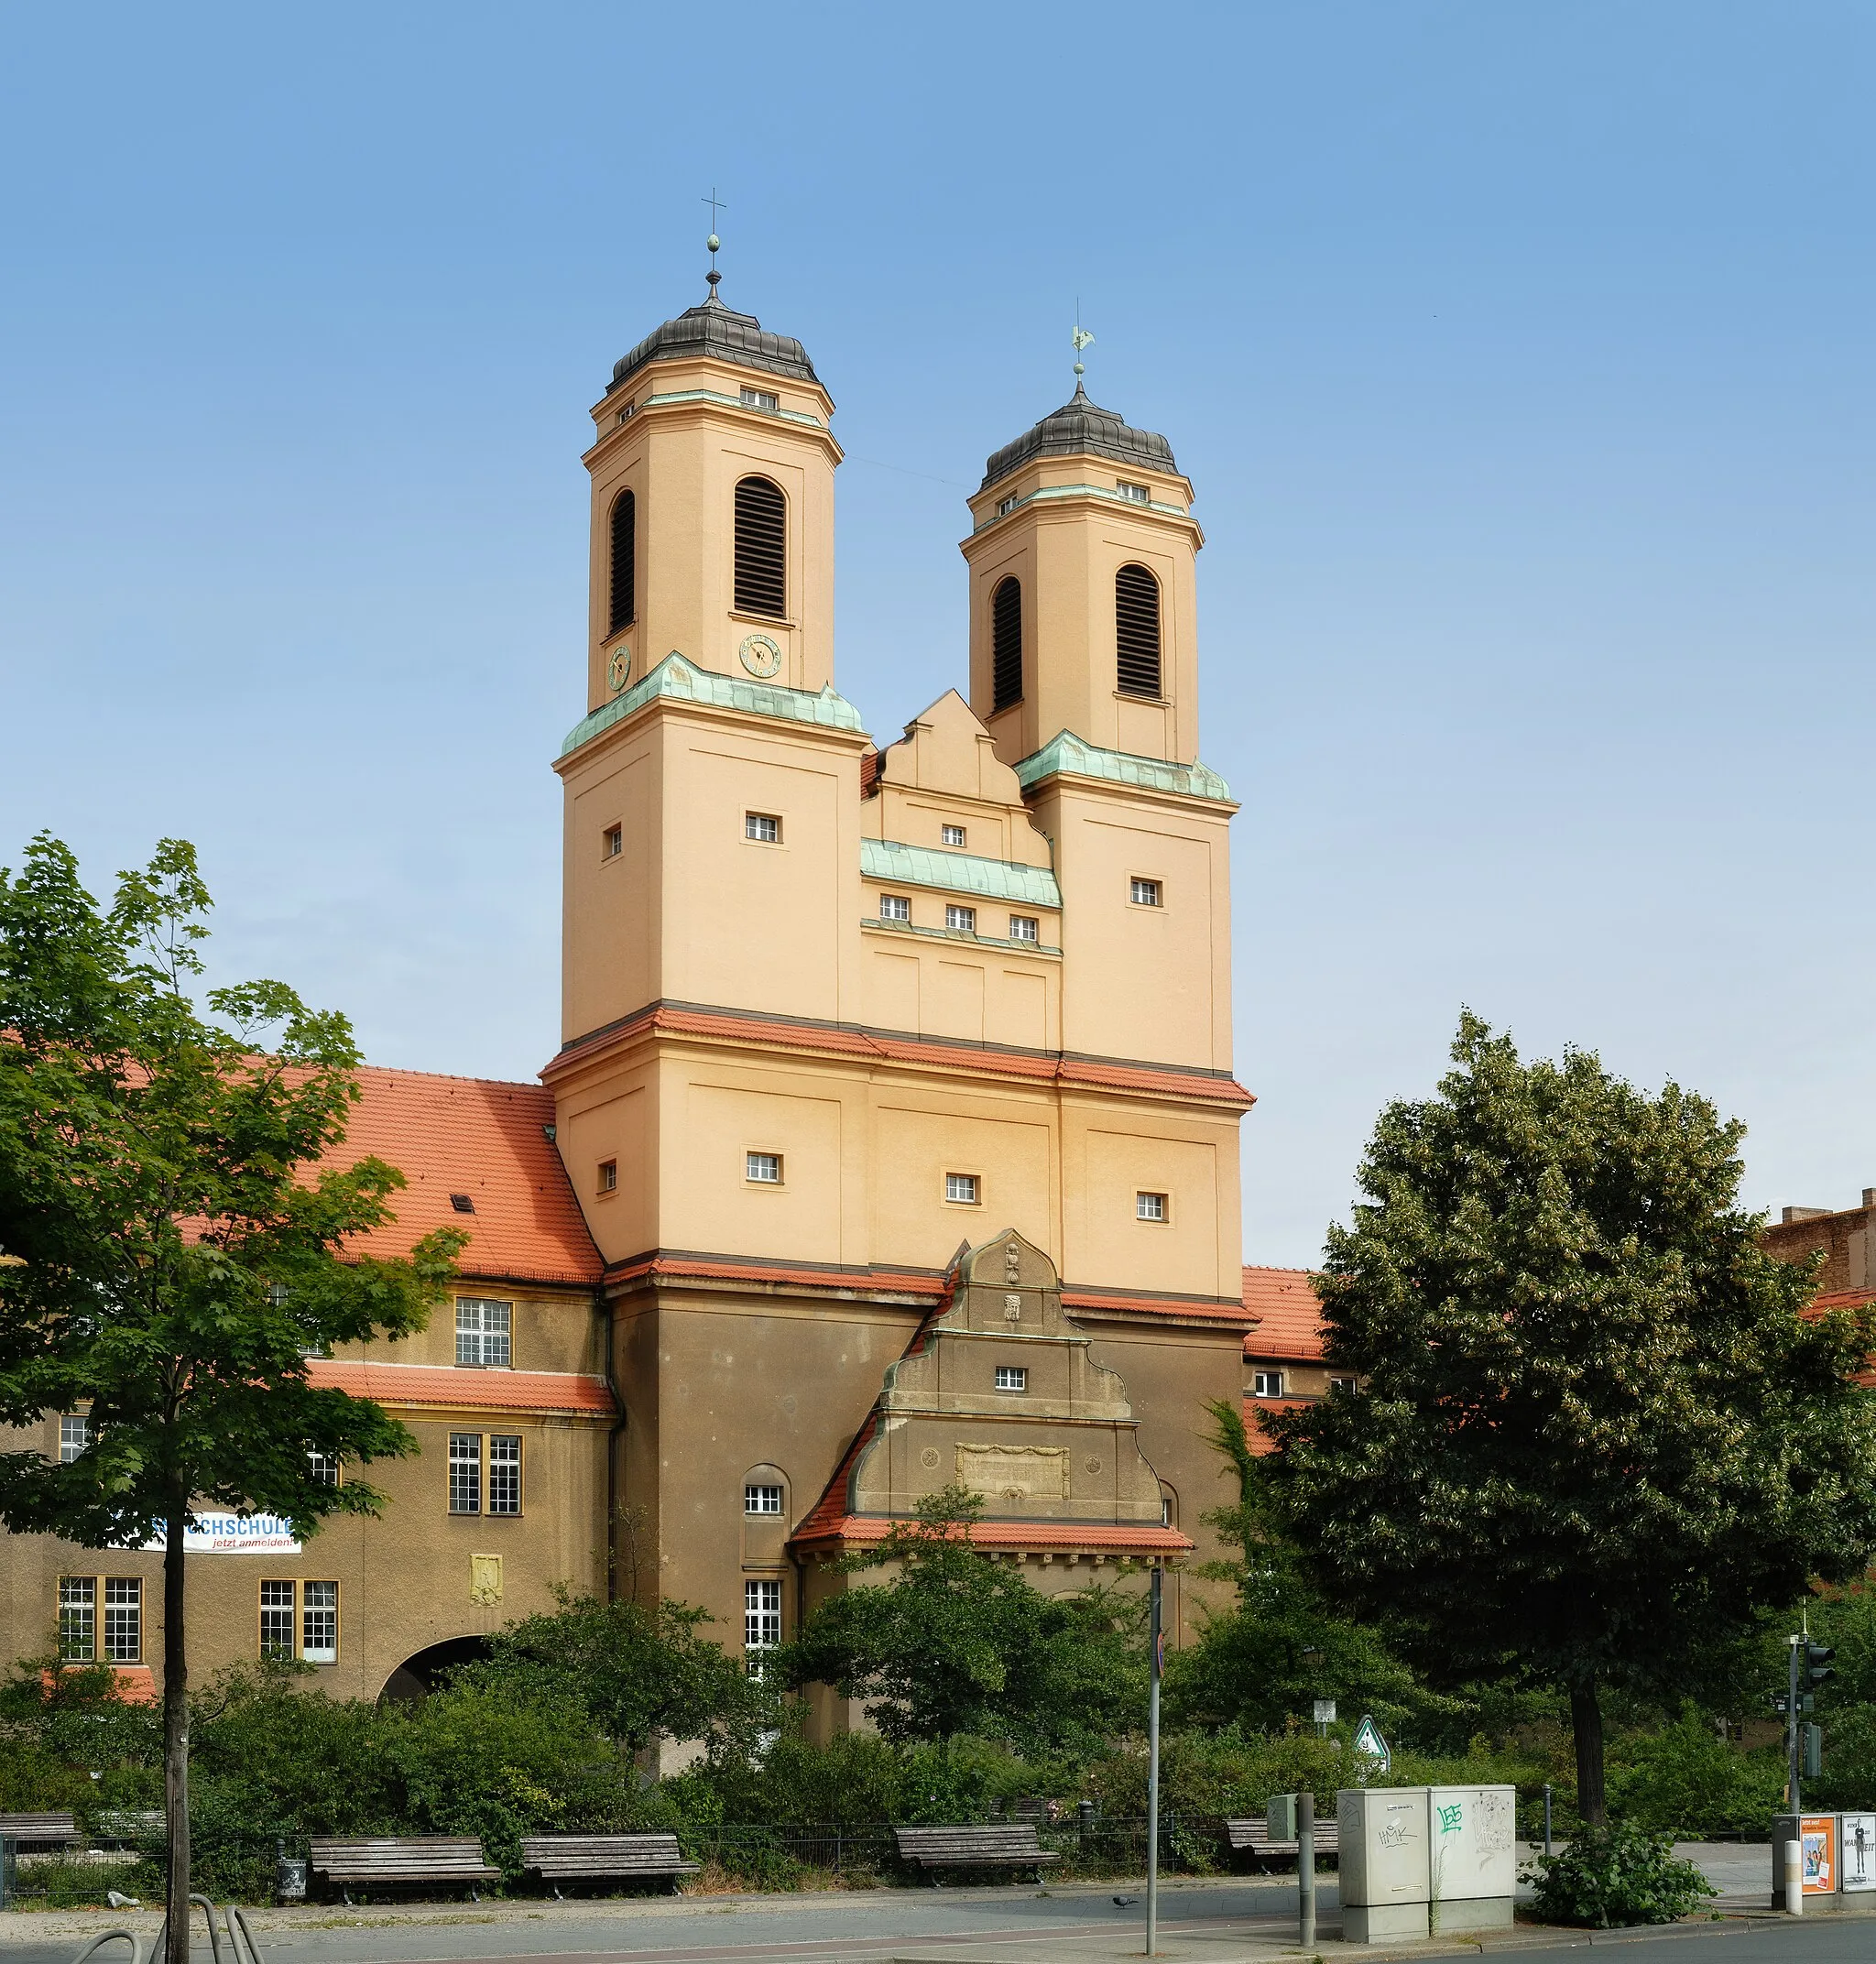 Photo showing: This image shows the church "Zum Vaterhaus" ("to the parental home") in Berlin, Germany. It is a six segment panoramic image.